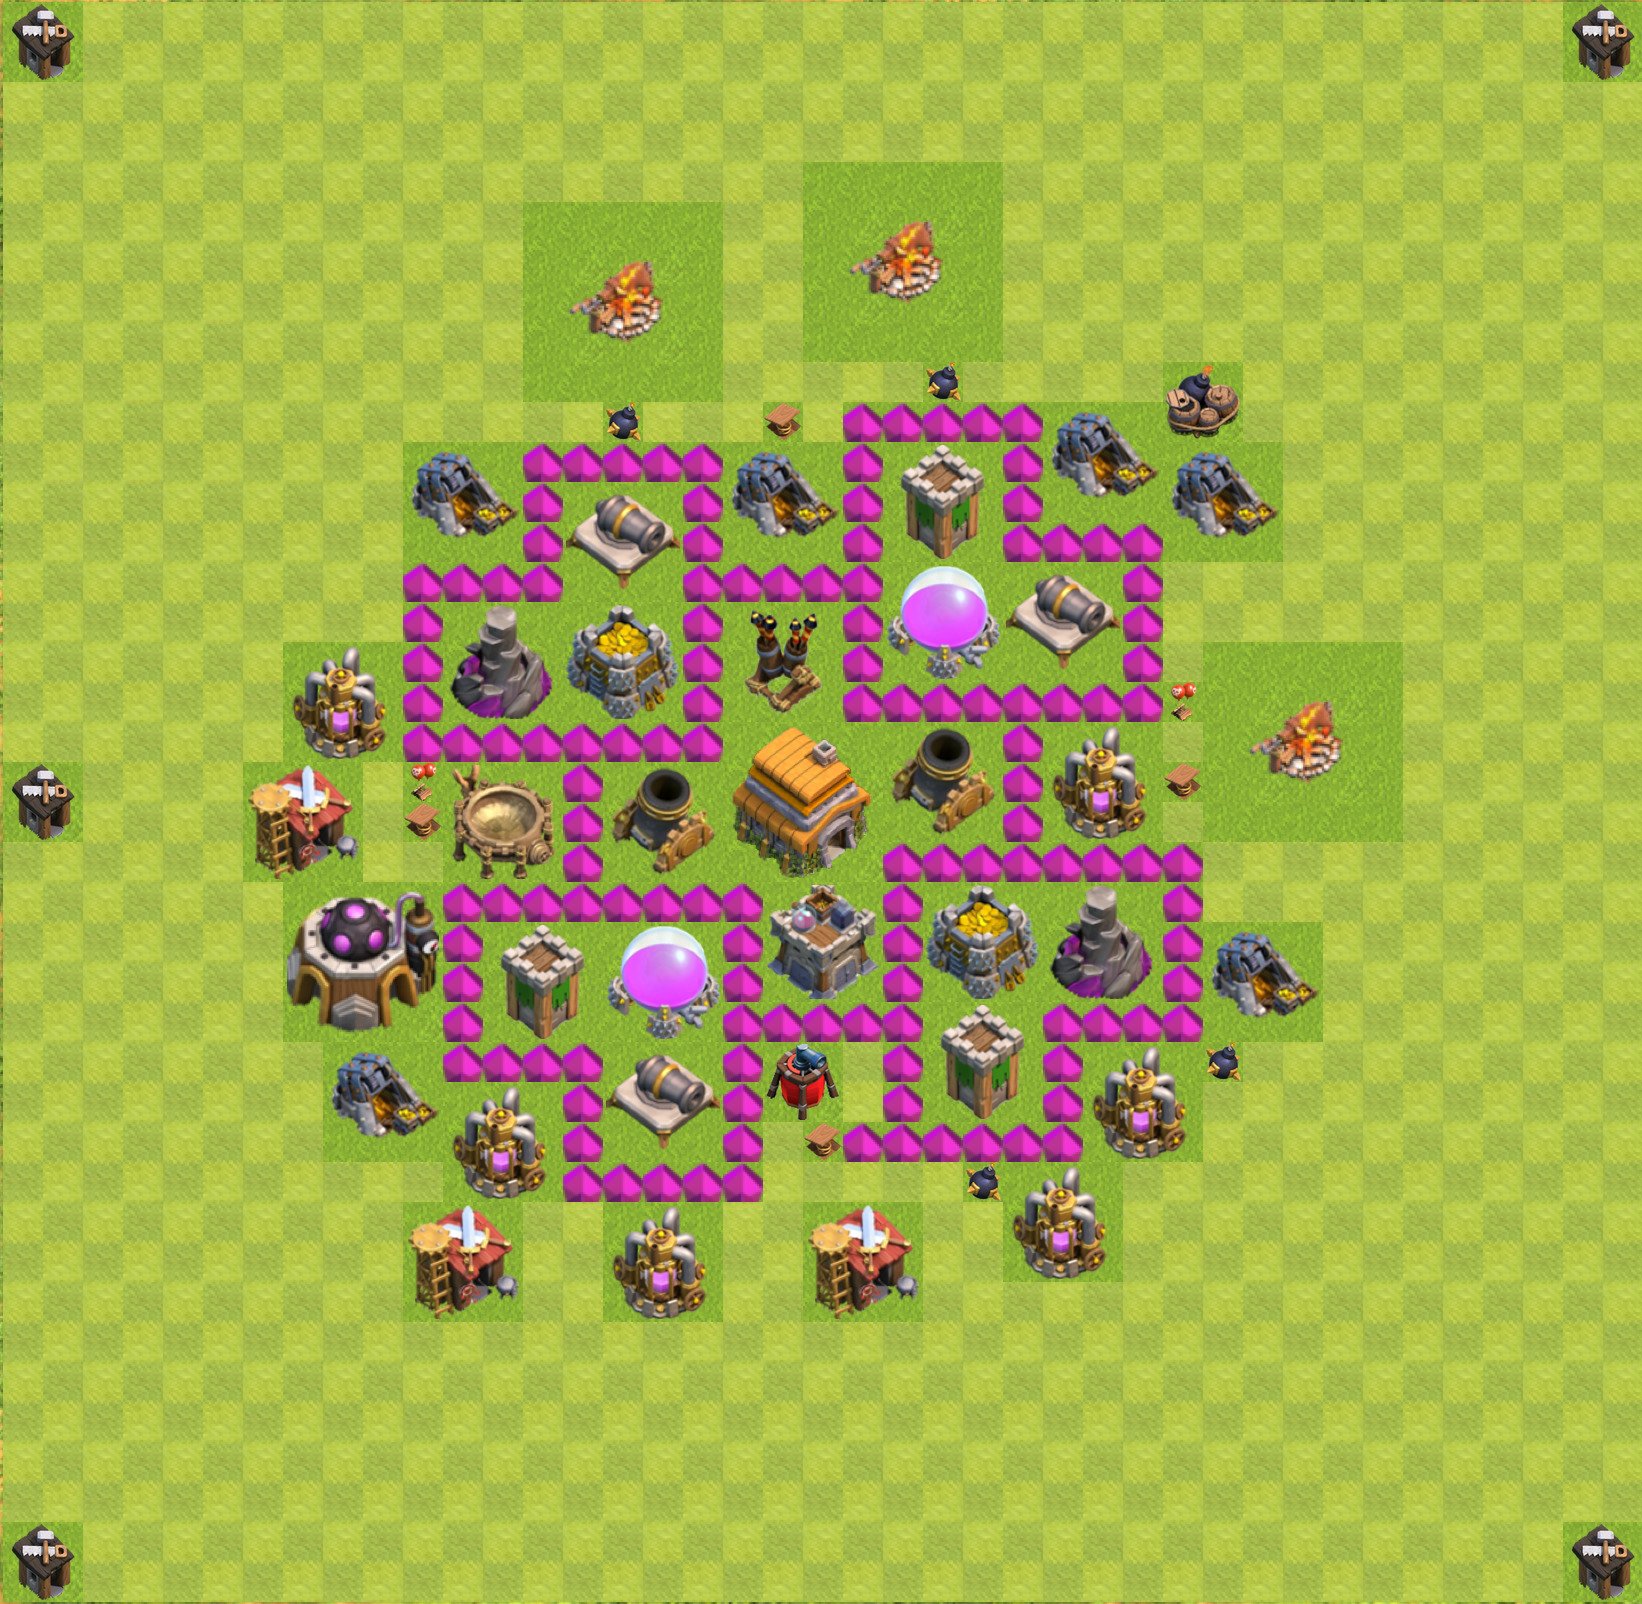 town hall level 6 defense